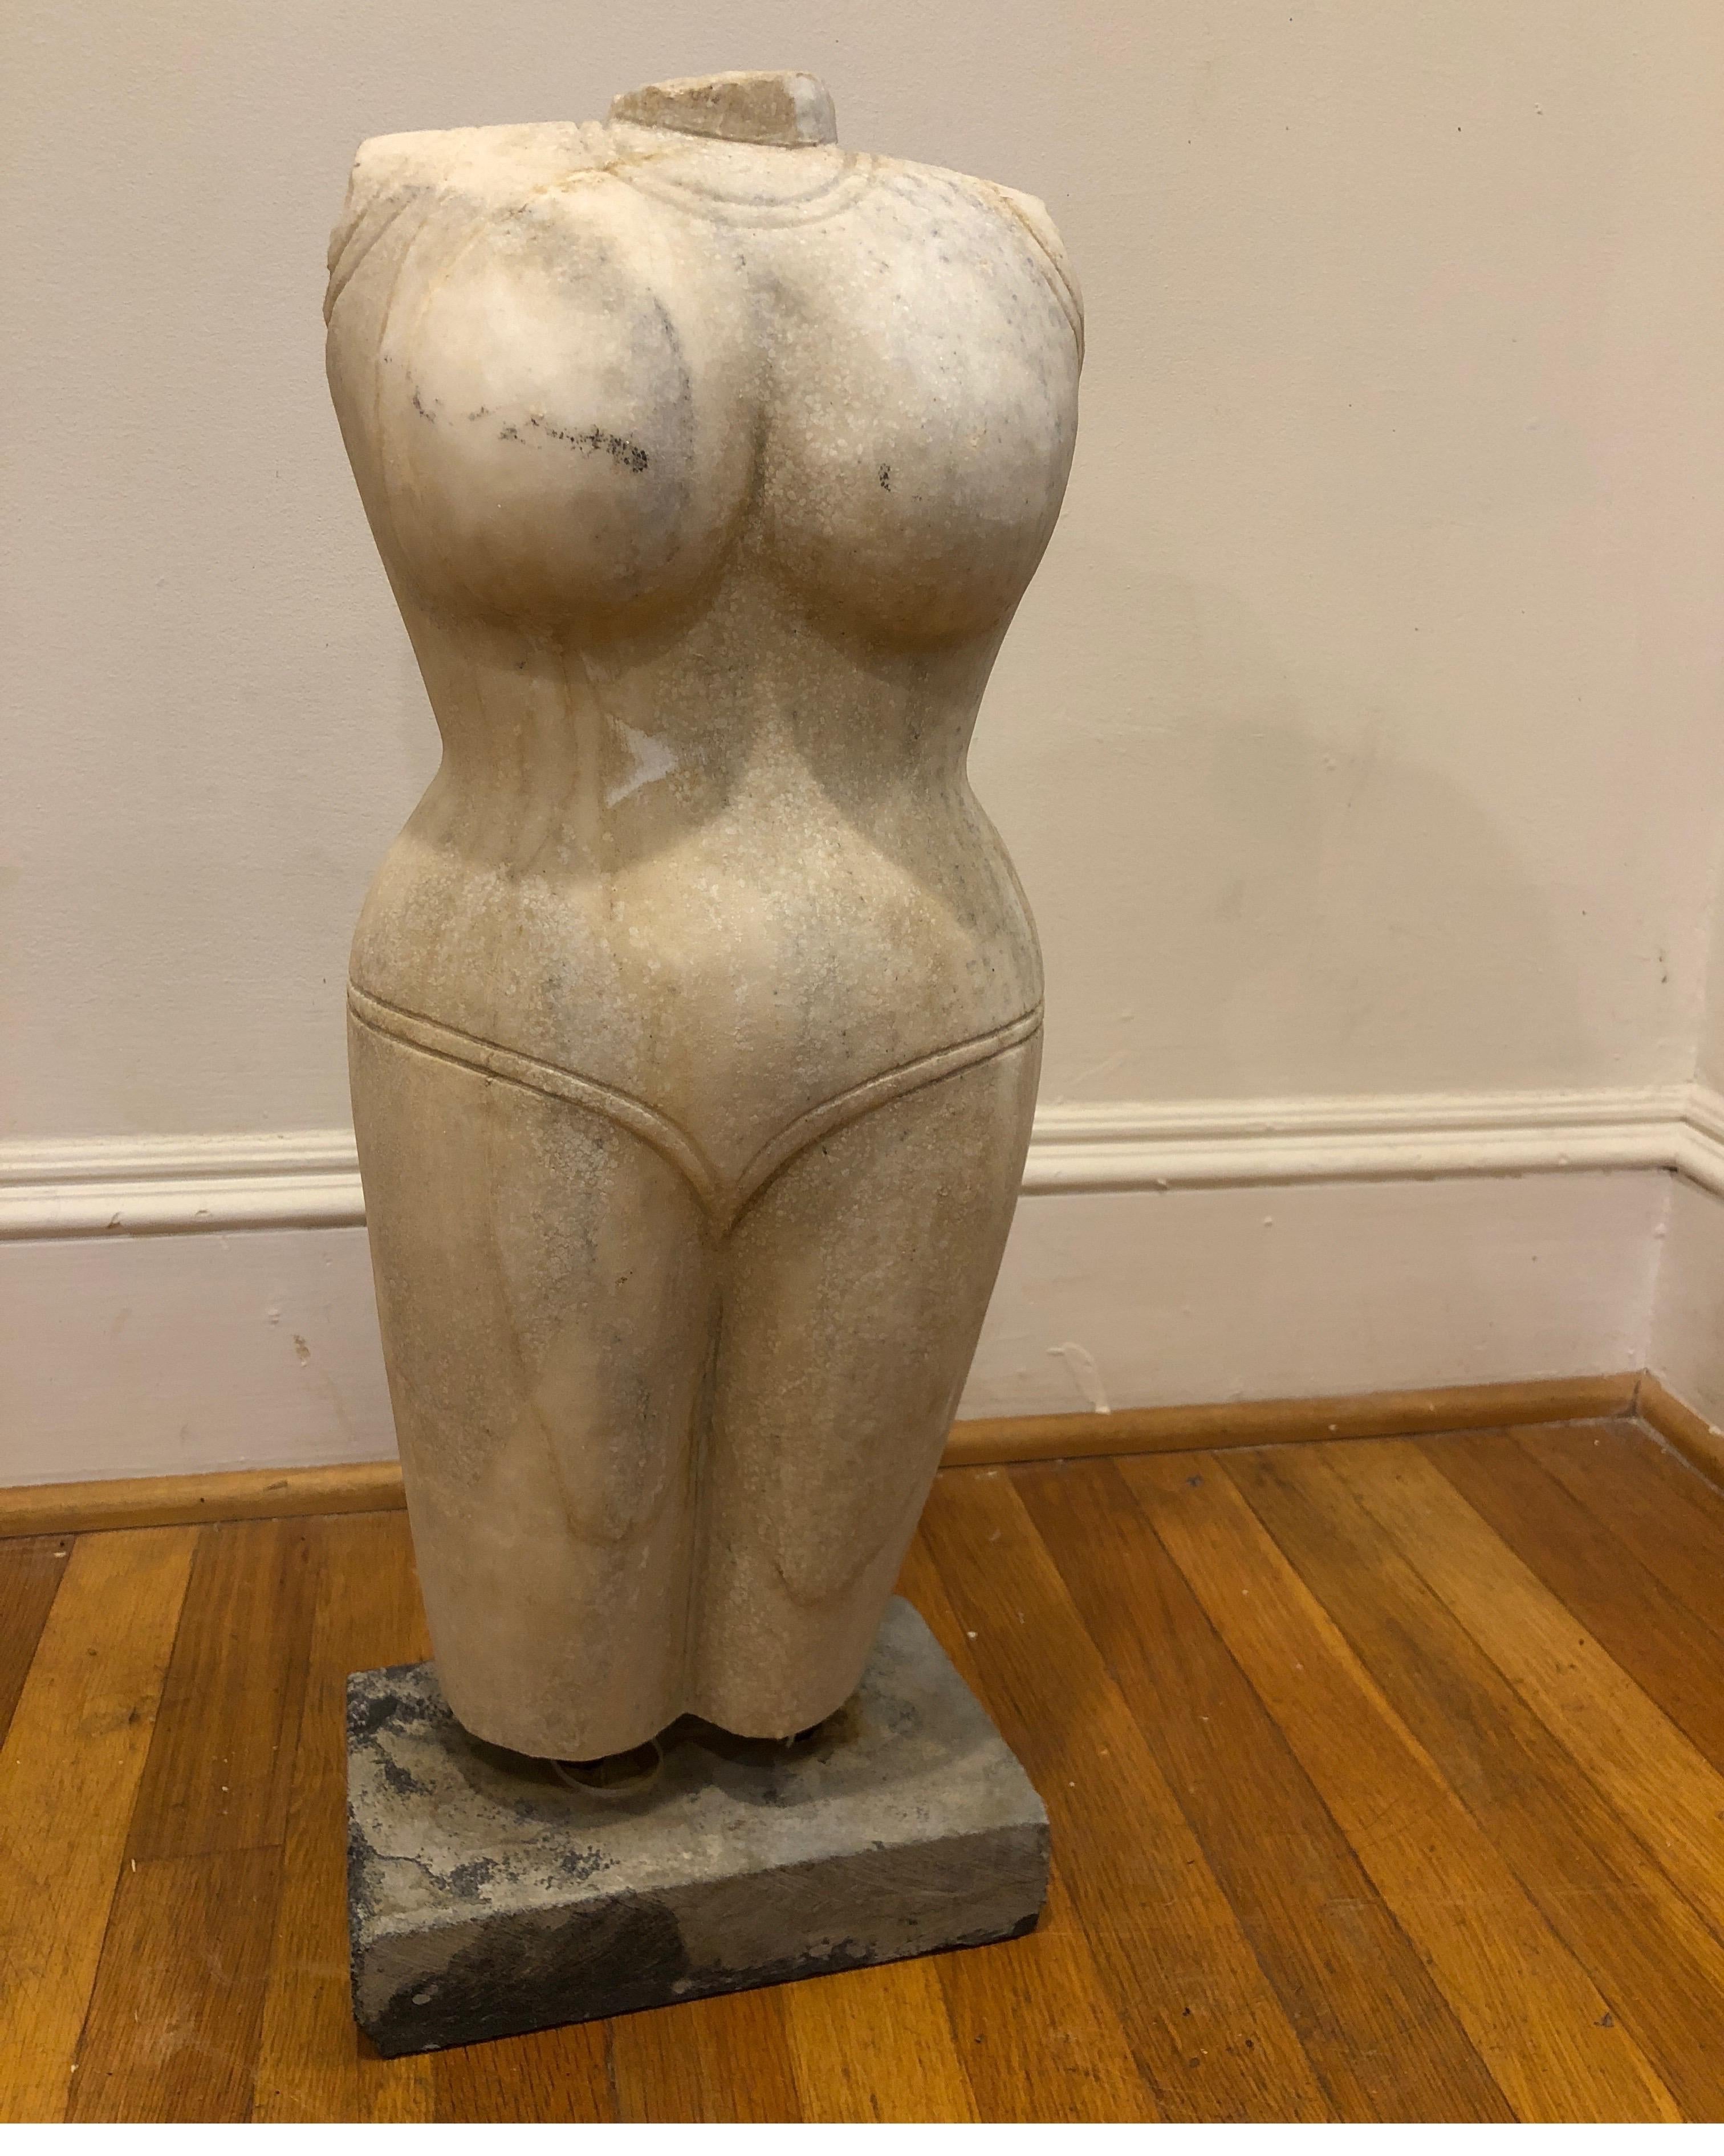 Indian style marble torso scultpture
Stately Carrera marble statuary figure of female body form. Mounted on a stone base.
Nicely carved and its overall surface has a natural patina.